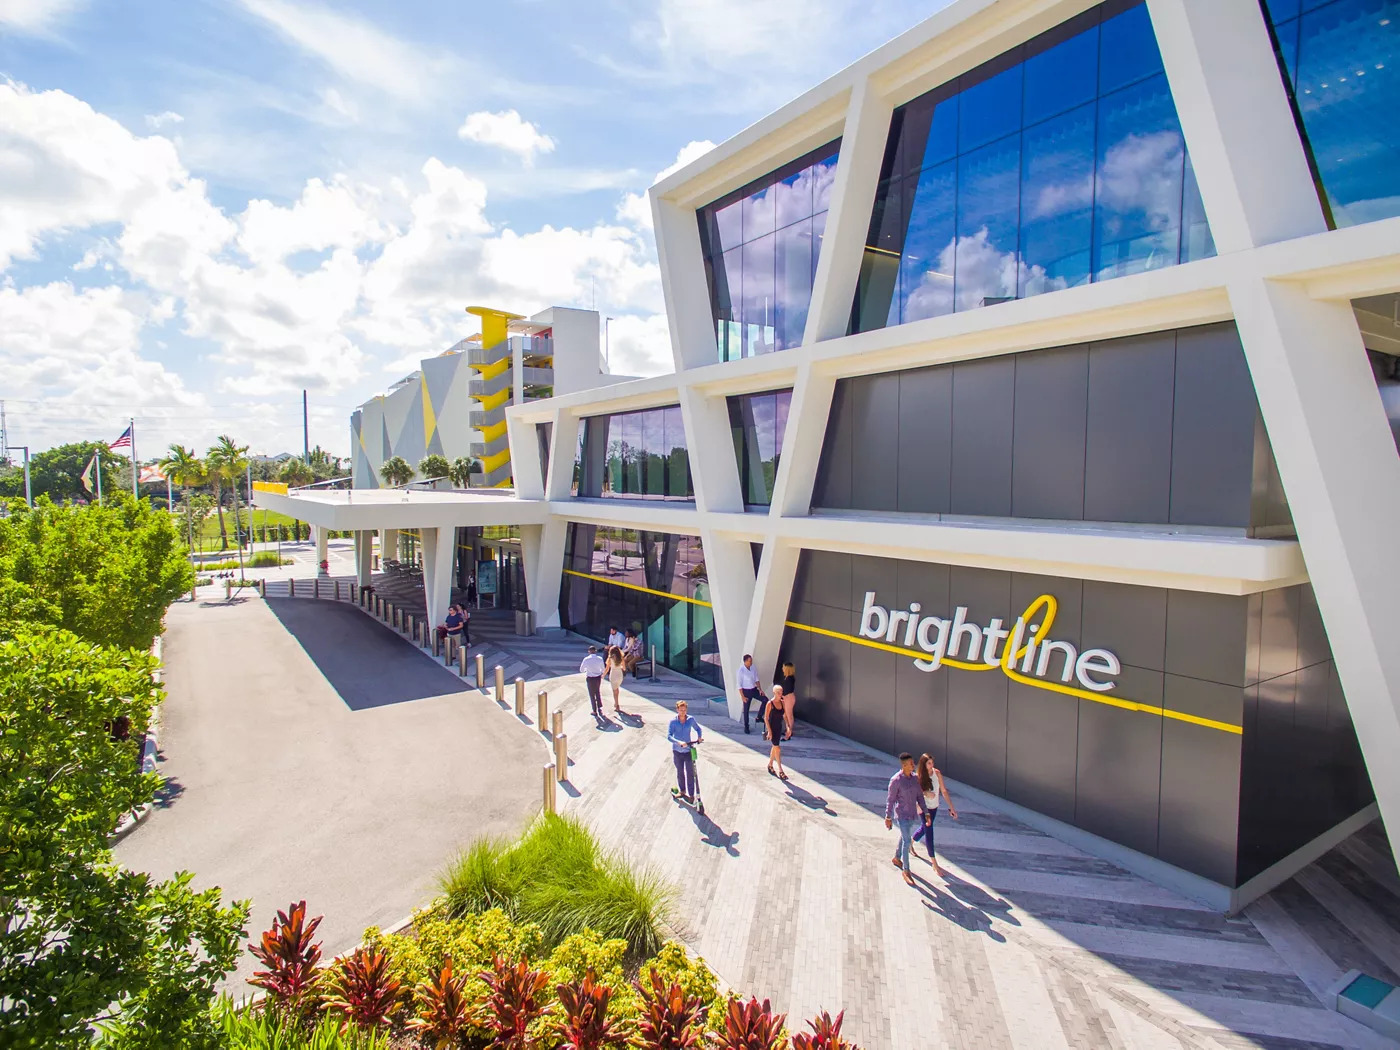 A New Brightline Station in Florida